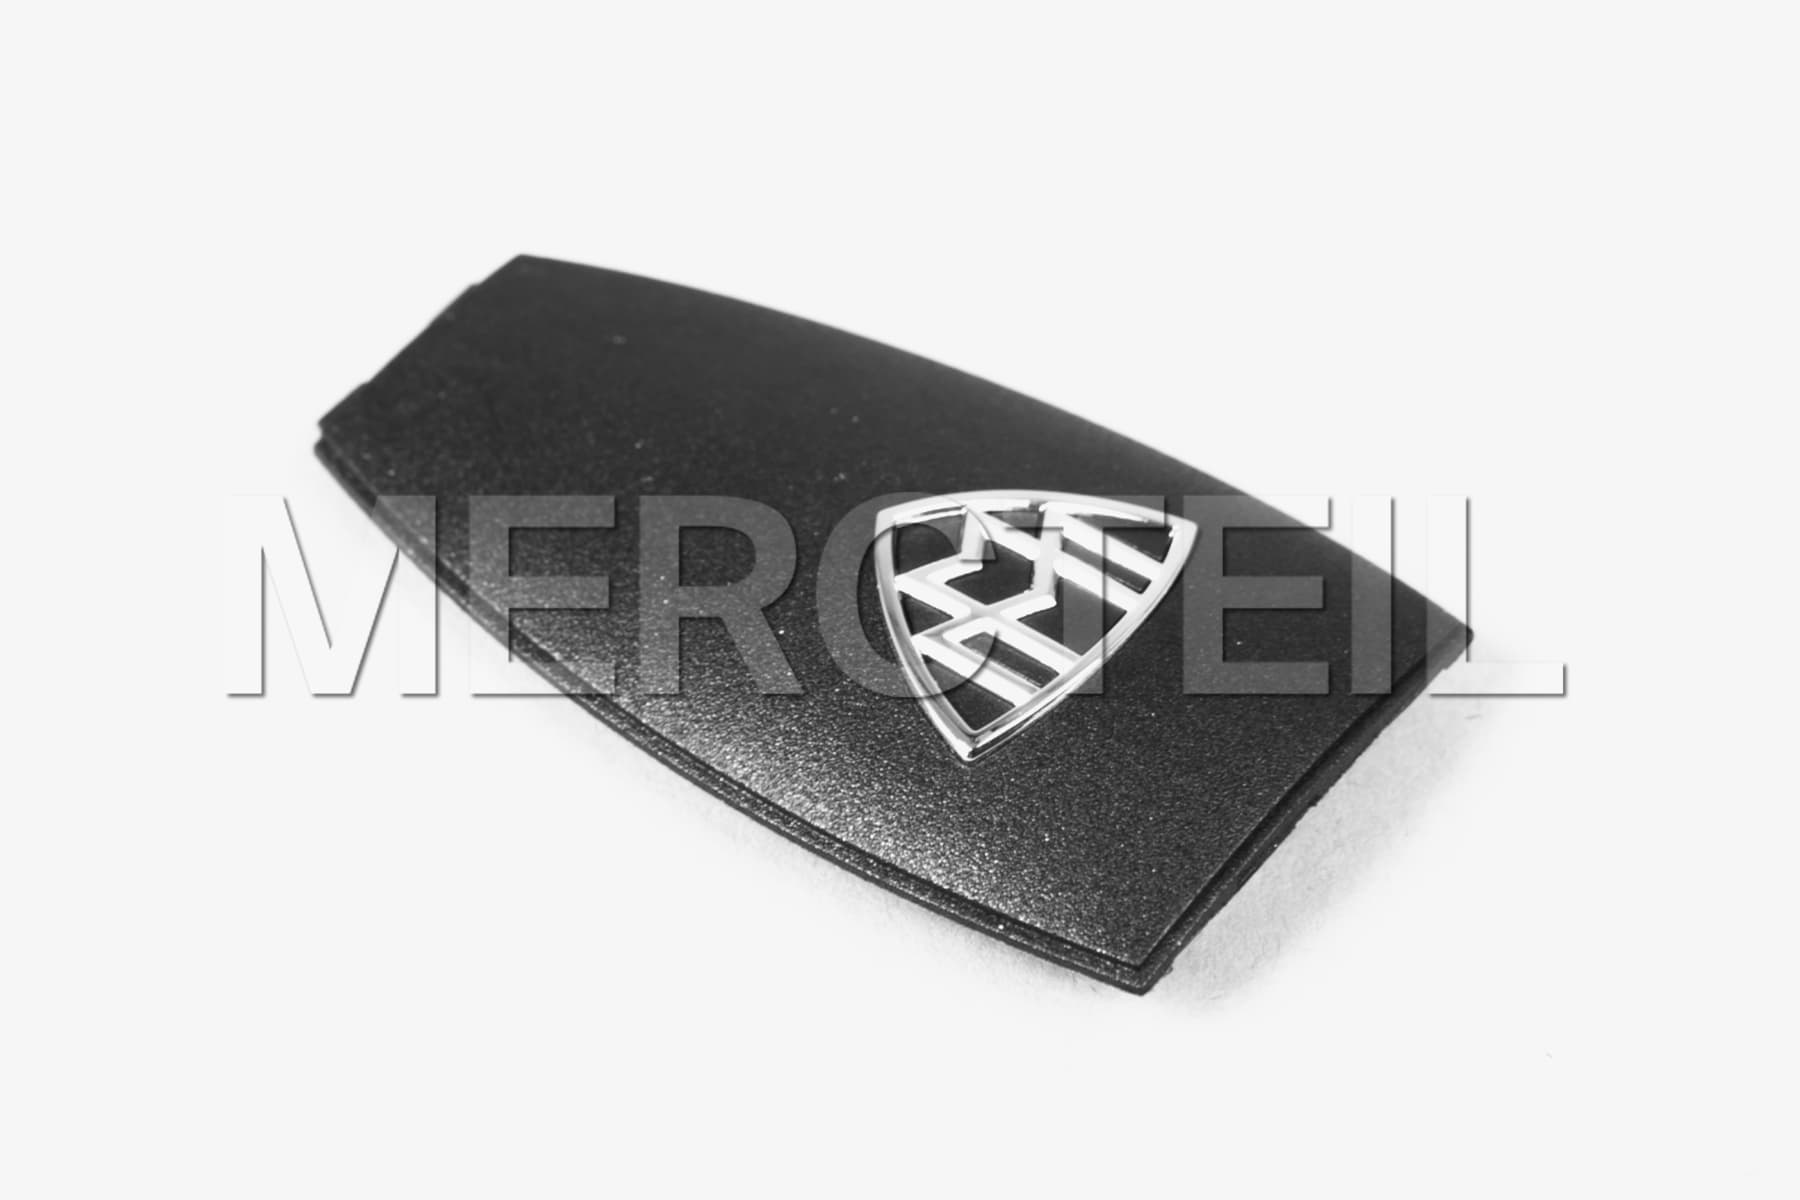 Maybach Key Cover (part number: A0007600400)